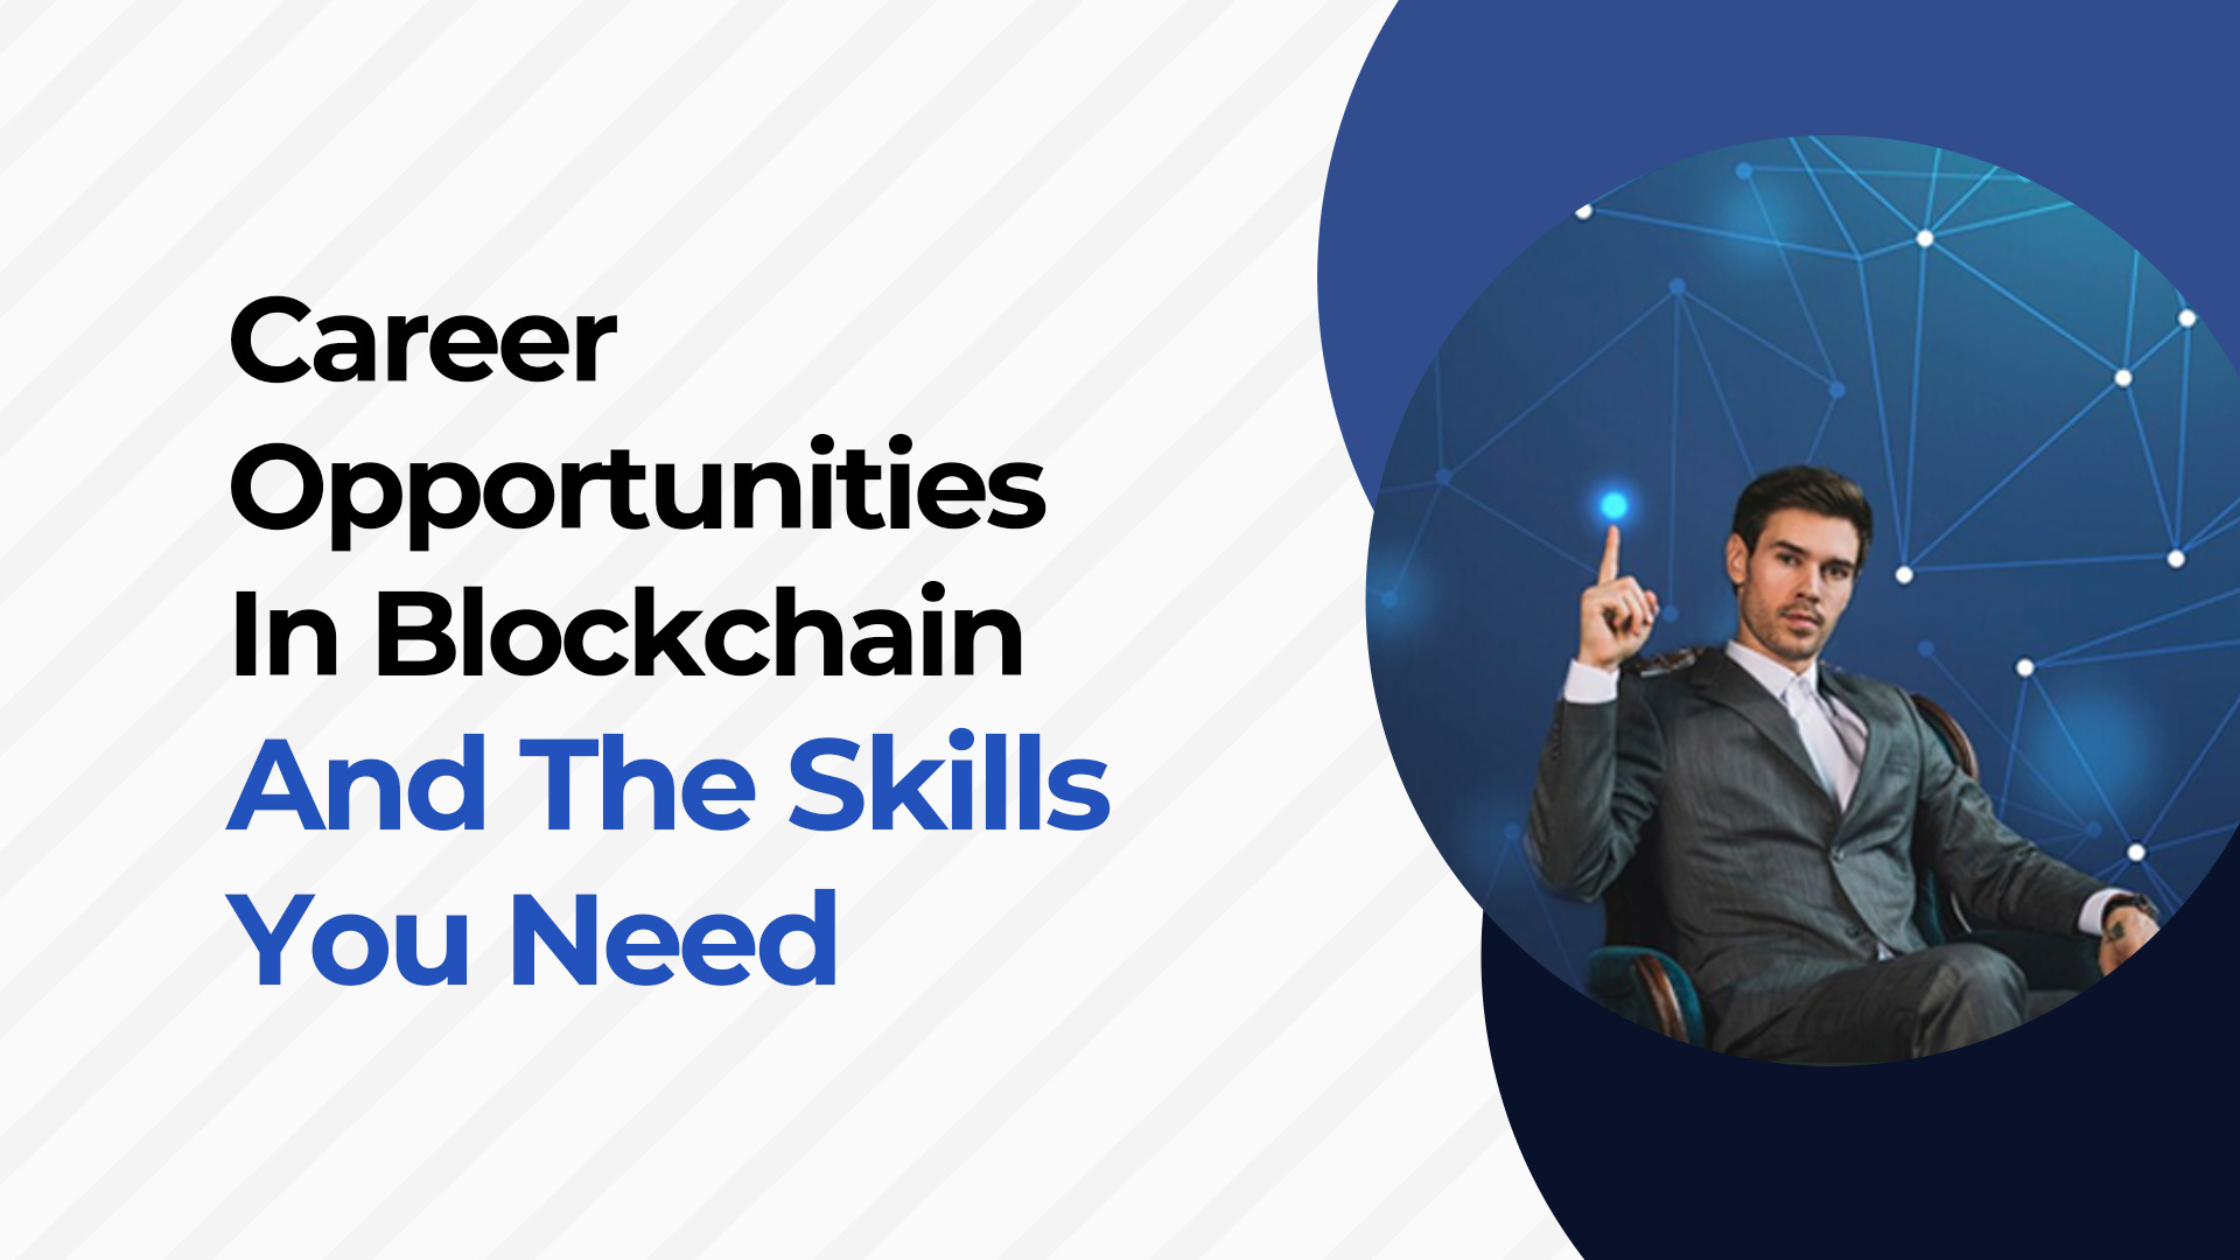 Career Opportunities In Blockchain And The Skills You Need